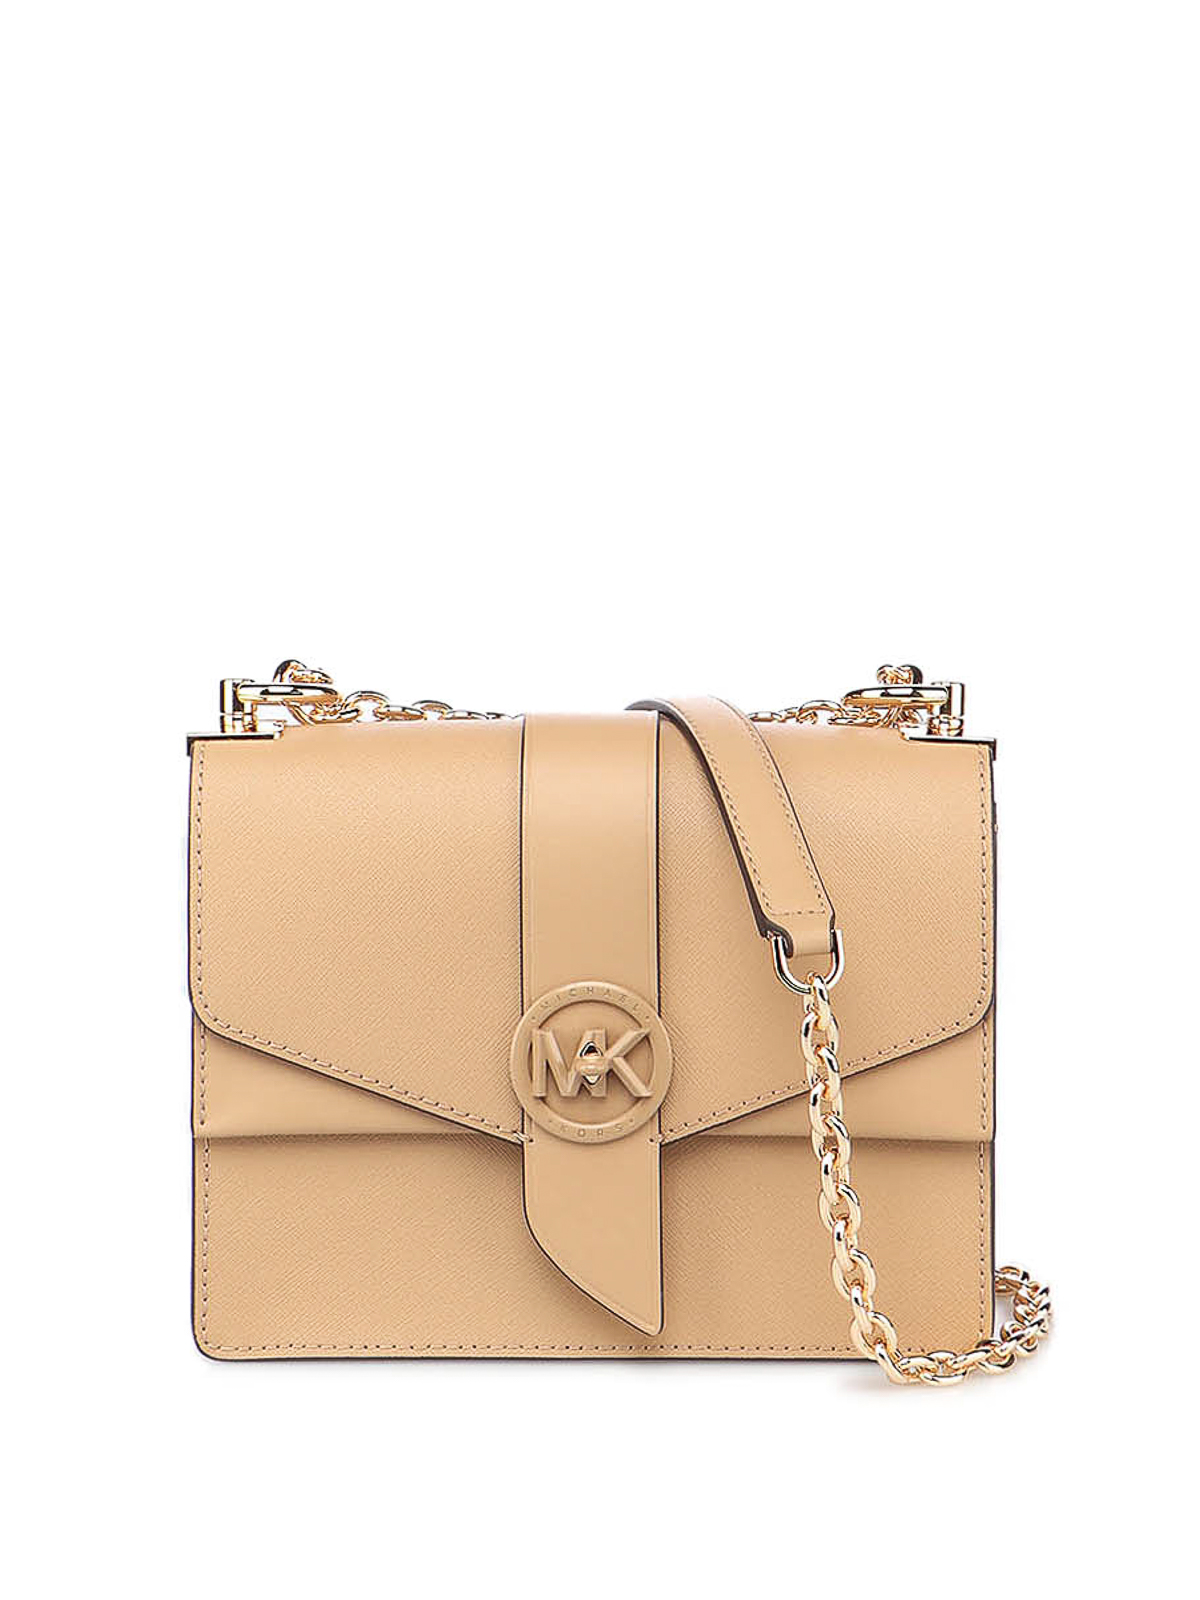 Authentic MICHAEL KORS - Greenwich Small Saffiano Leather Crossbody Bag